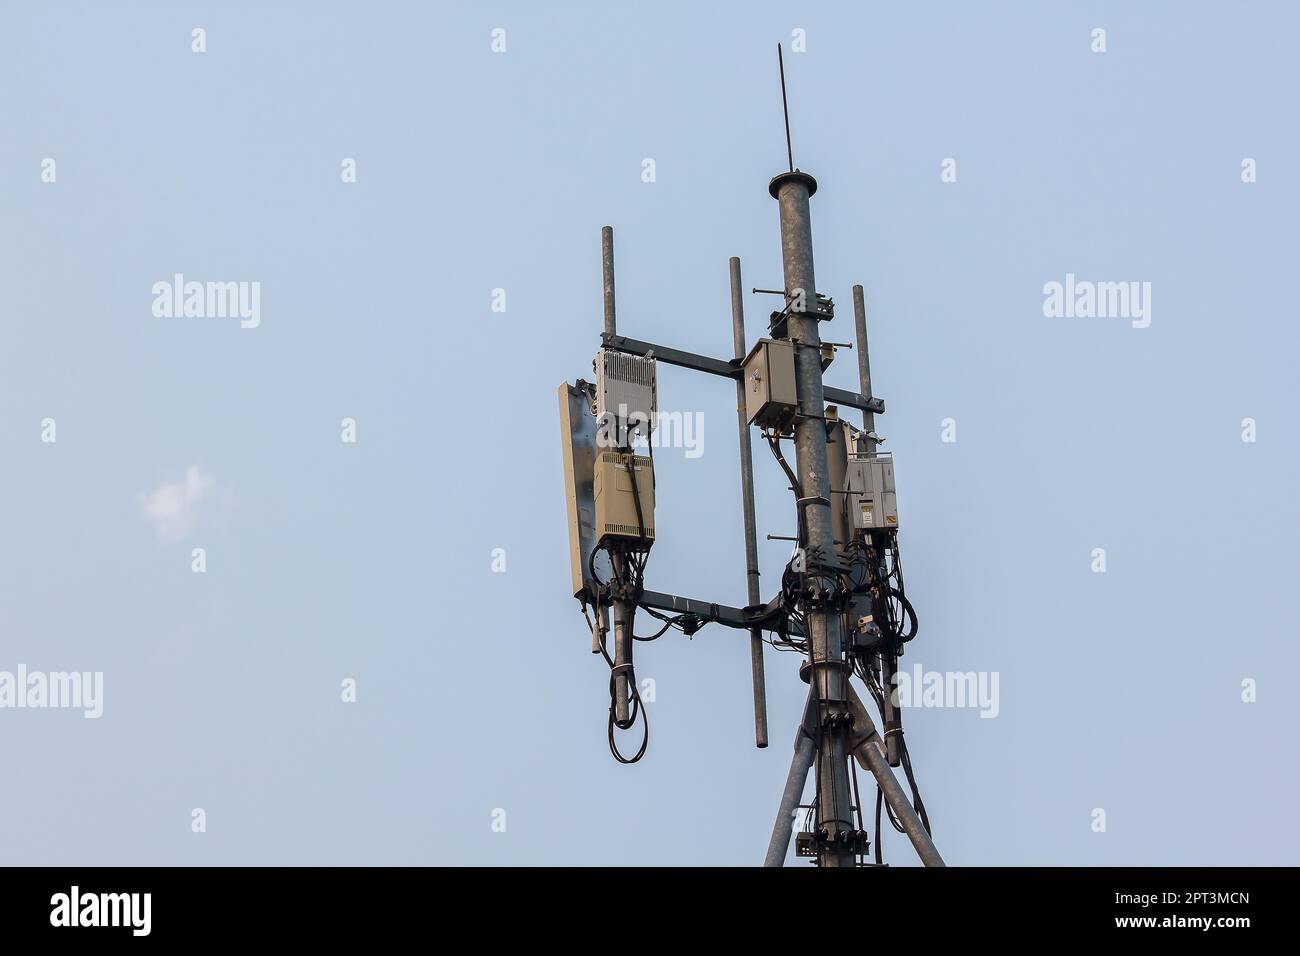 https://c8.alamy.com/comp/2PT3MCN/panel-antenna-installed-on-steel-posts-on-high-rise-buildings-in-the-city-2PT3MCN.jpg